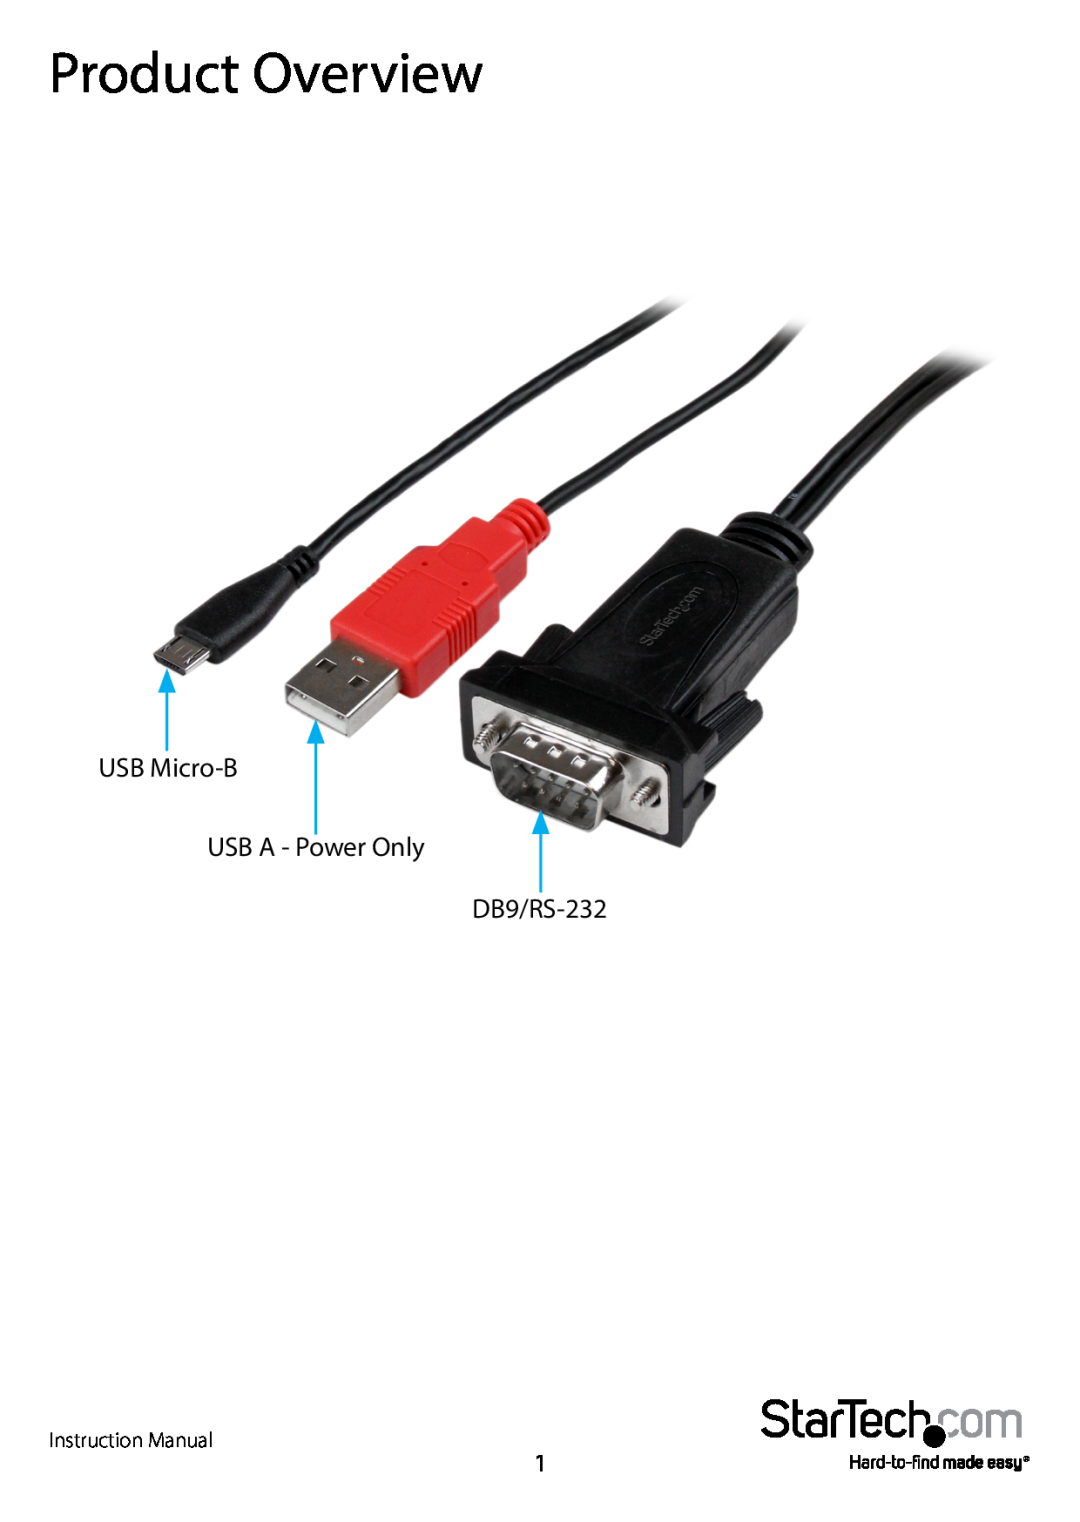 StarTech.com RS232 manual Product Overview, USB Micro-B USB A - Power Only DB9/RS-232 